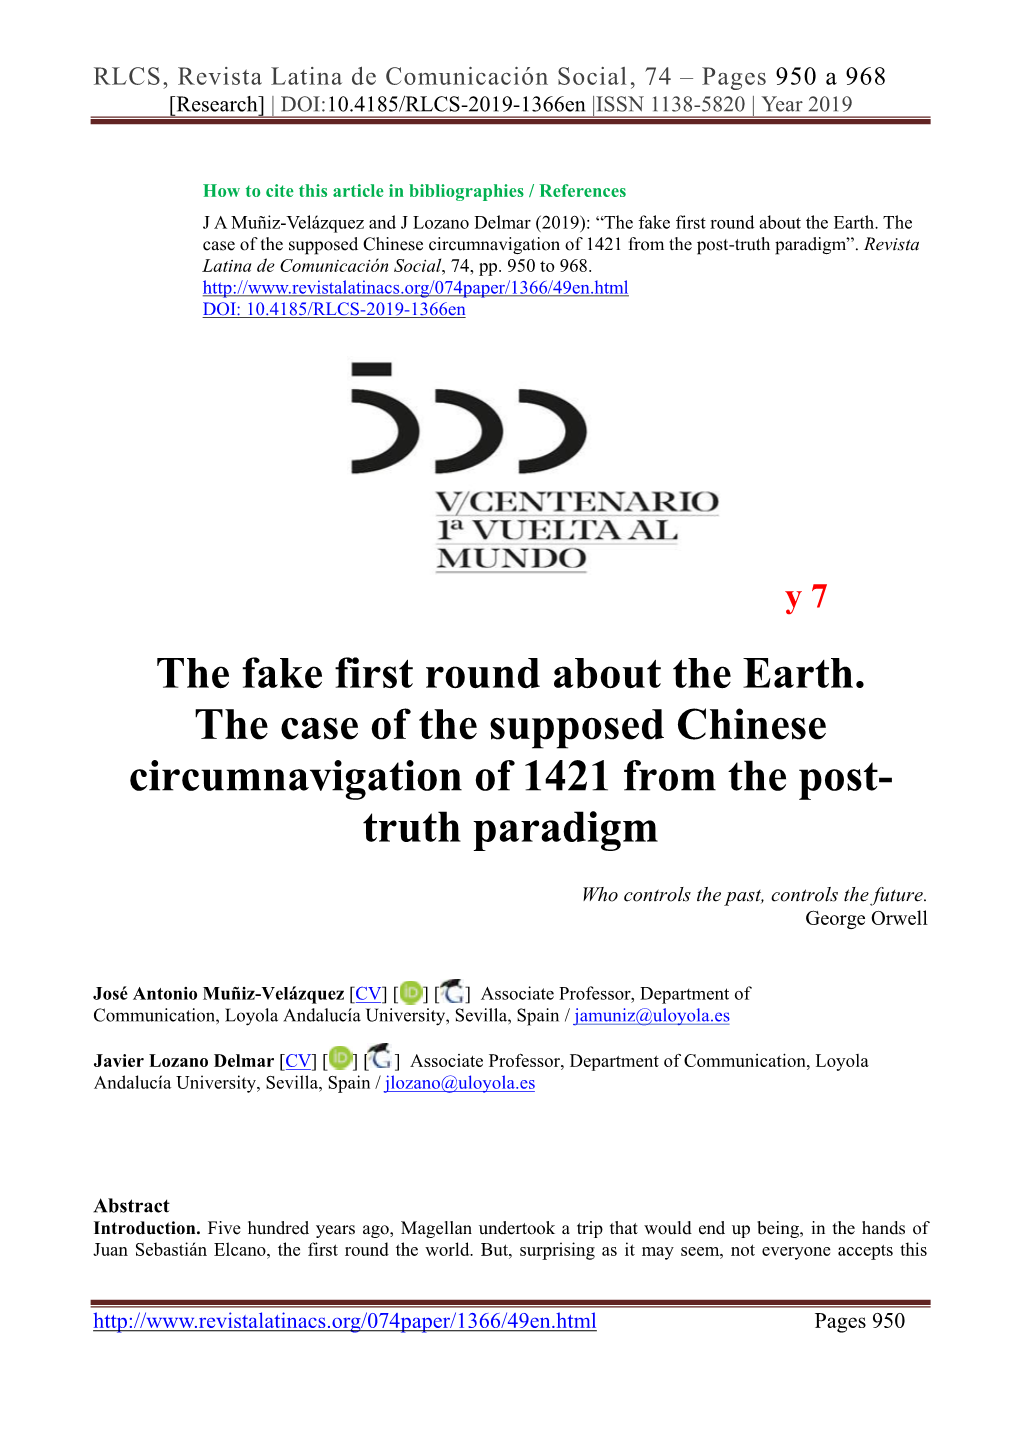 The Fake First Round About the Earth. the Case of the Supposed Chinese Circumnavigation of 1421 from the Post-Truth Paradigm”